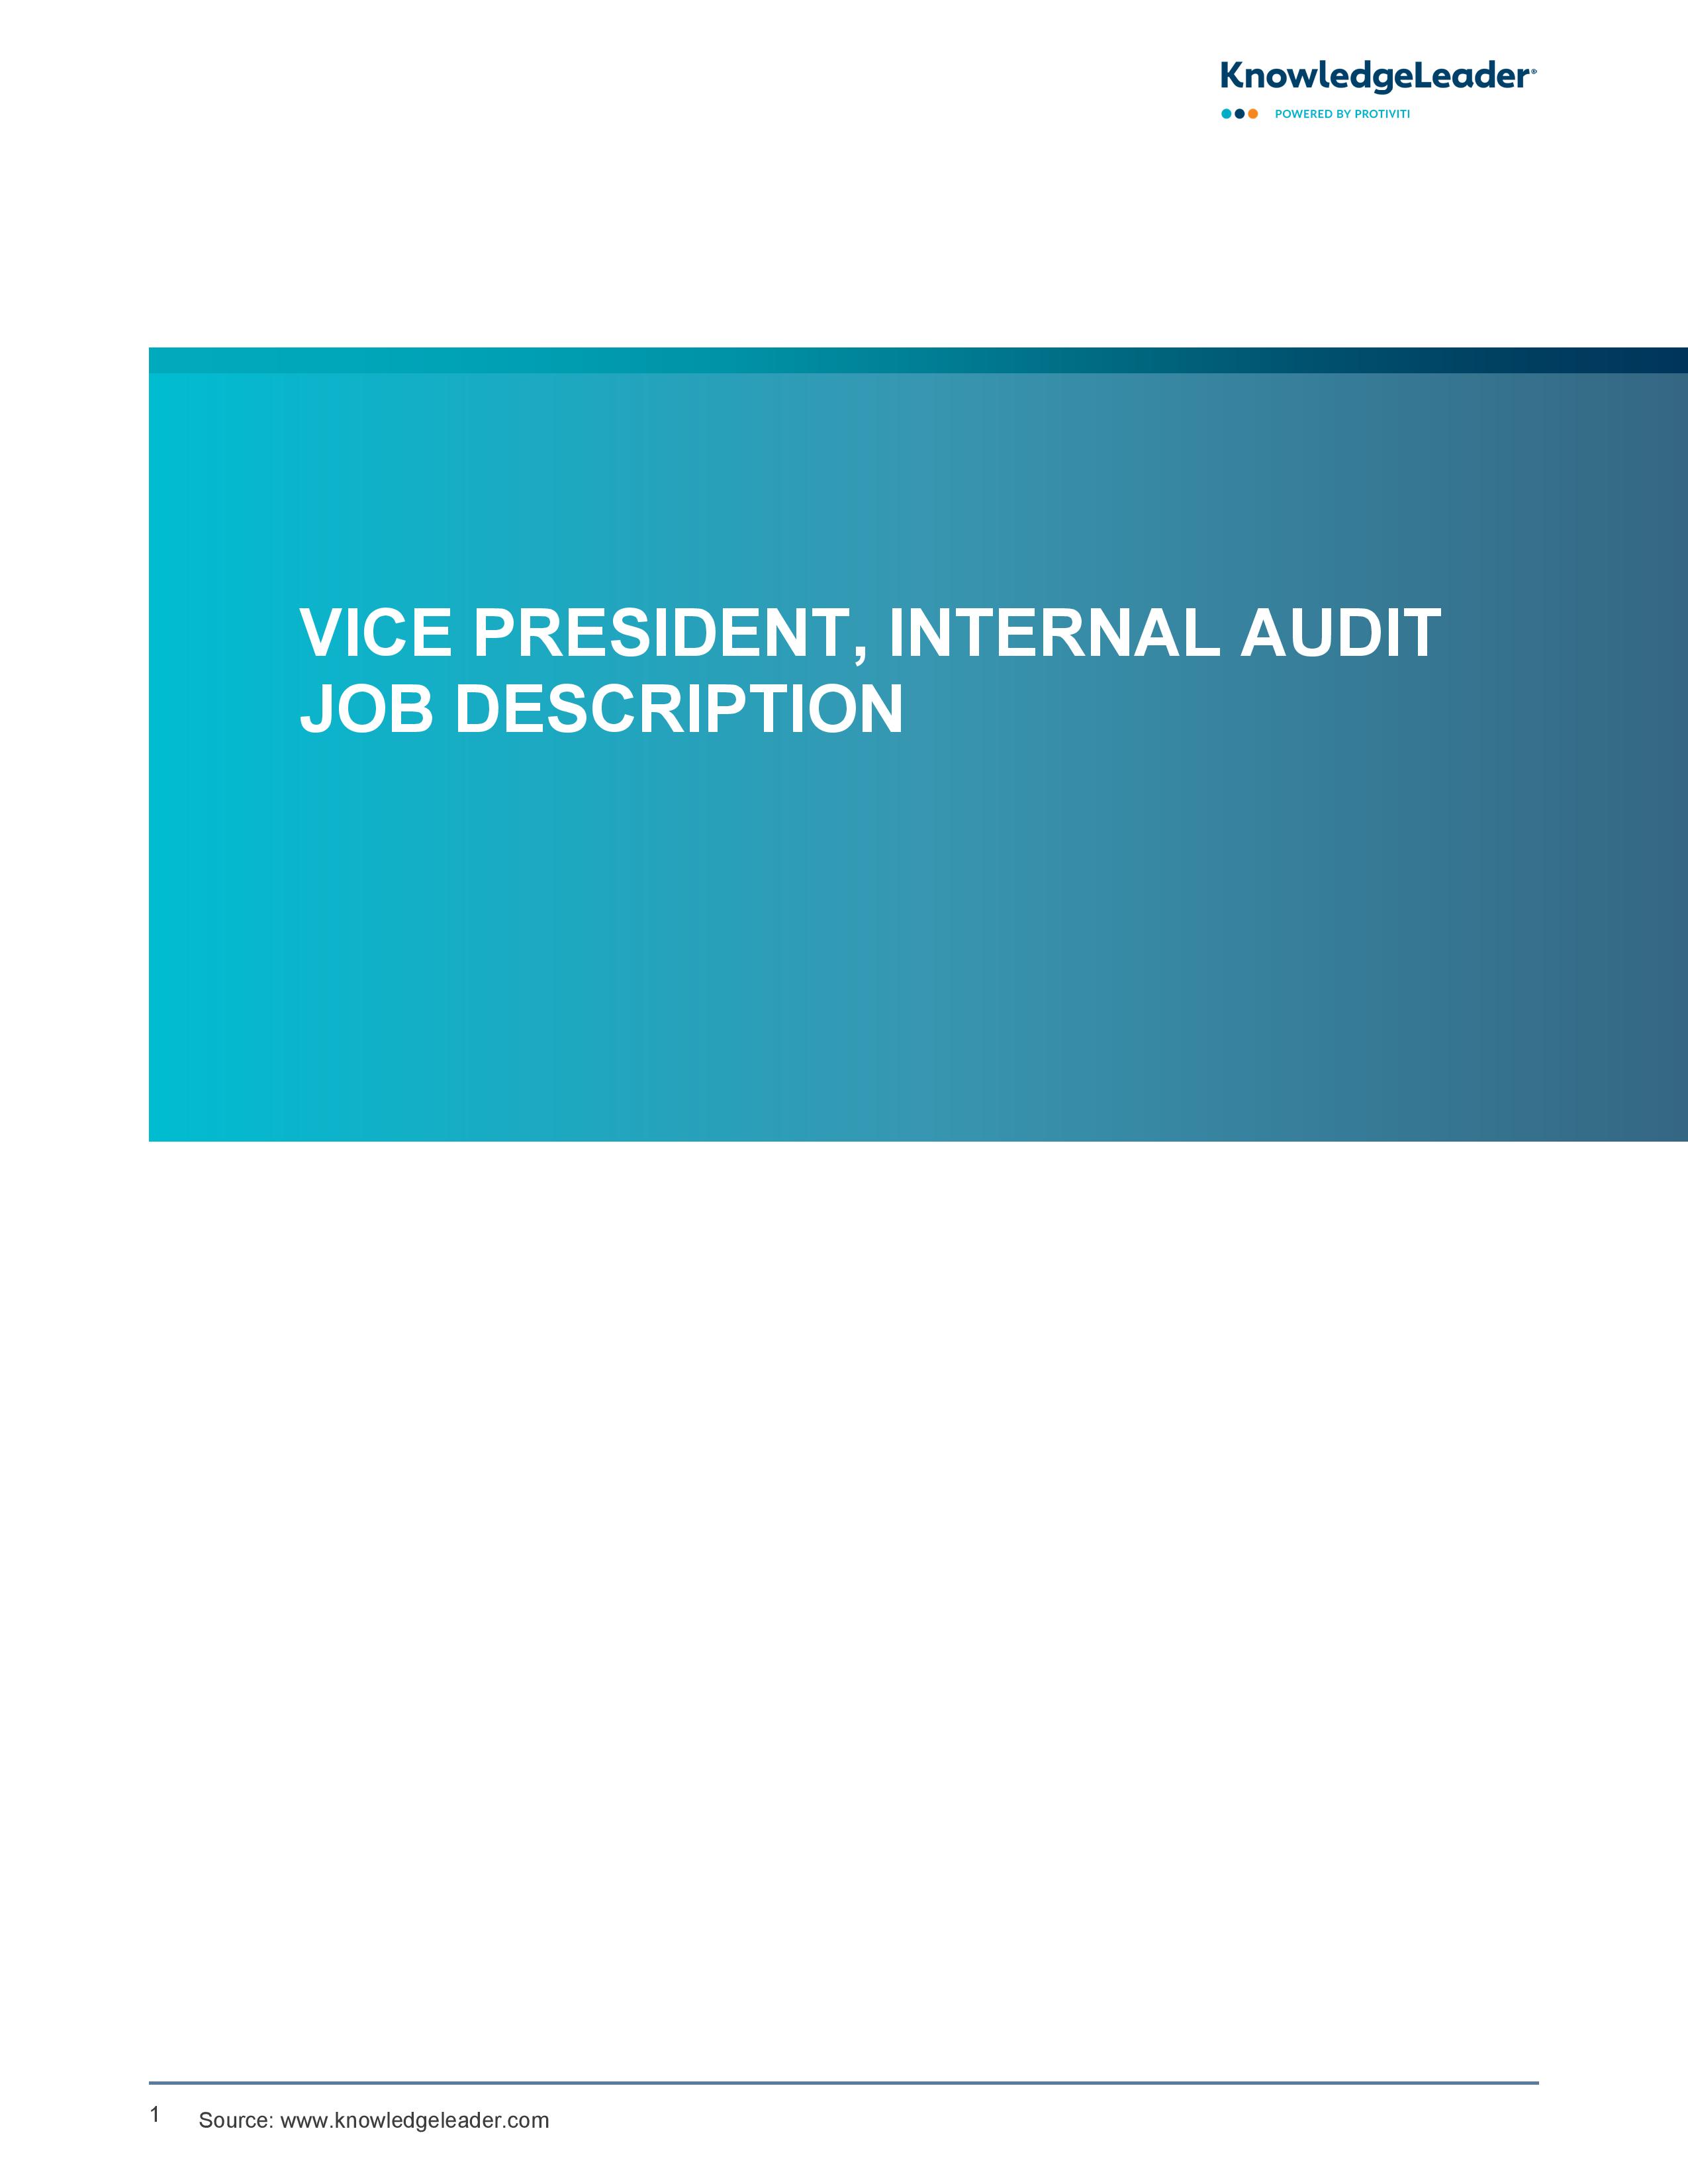 screenshot of the first page of Vice President, Internal Audit Job Description